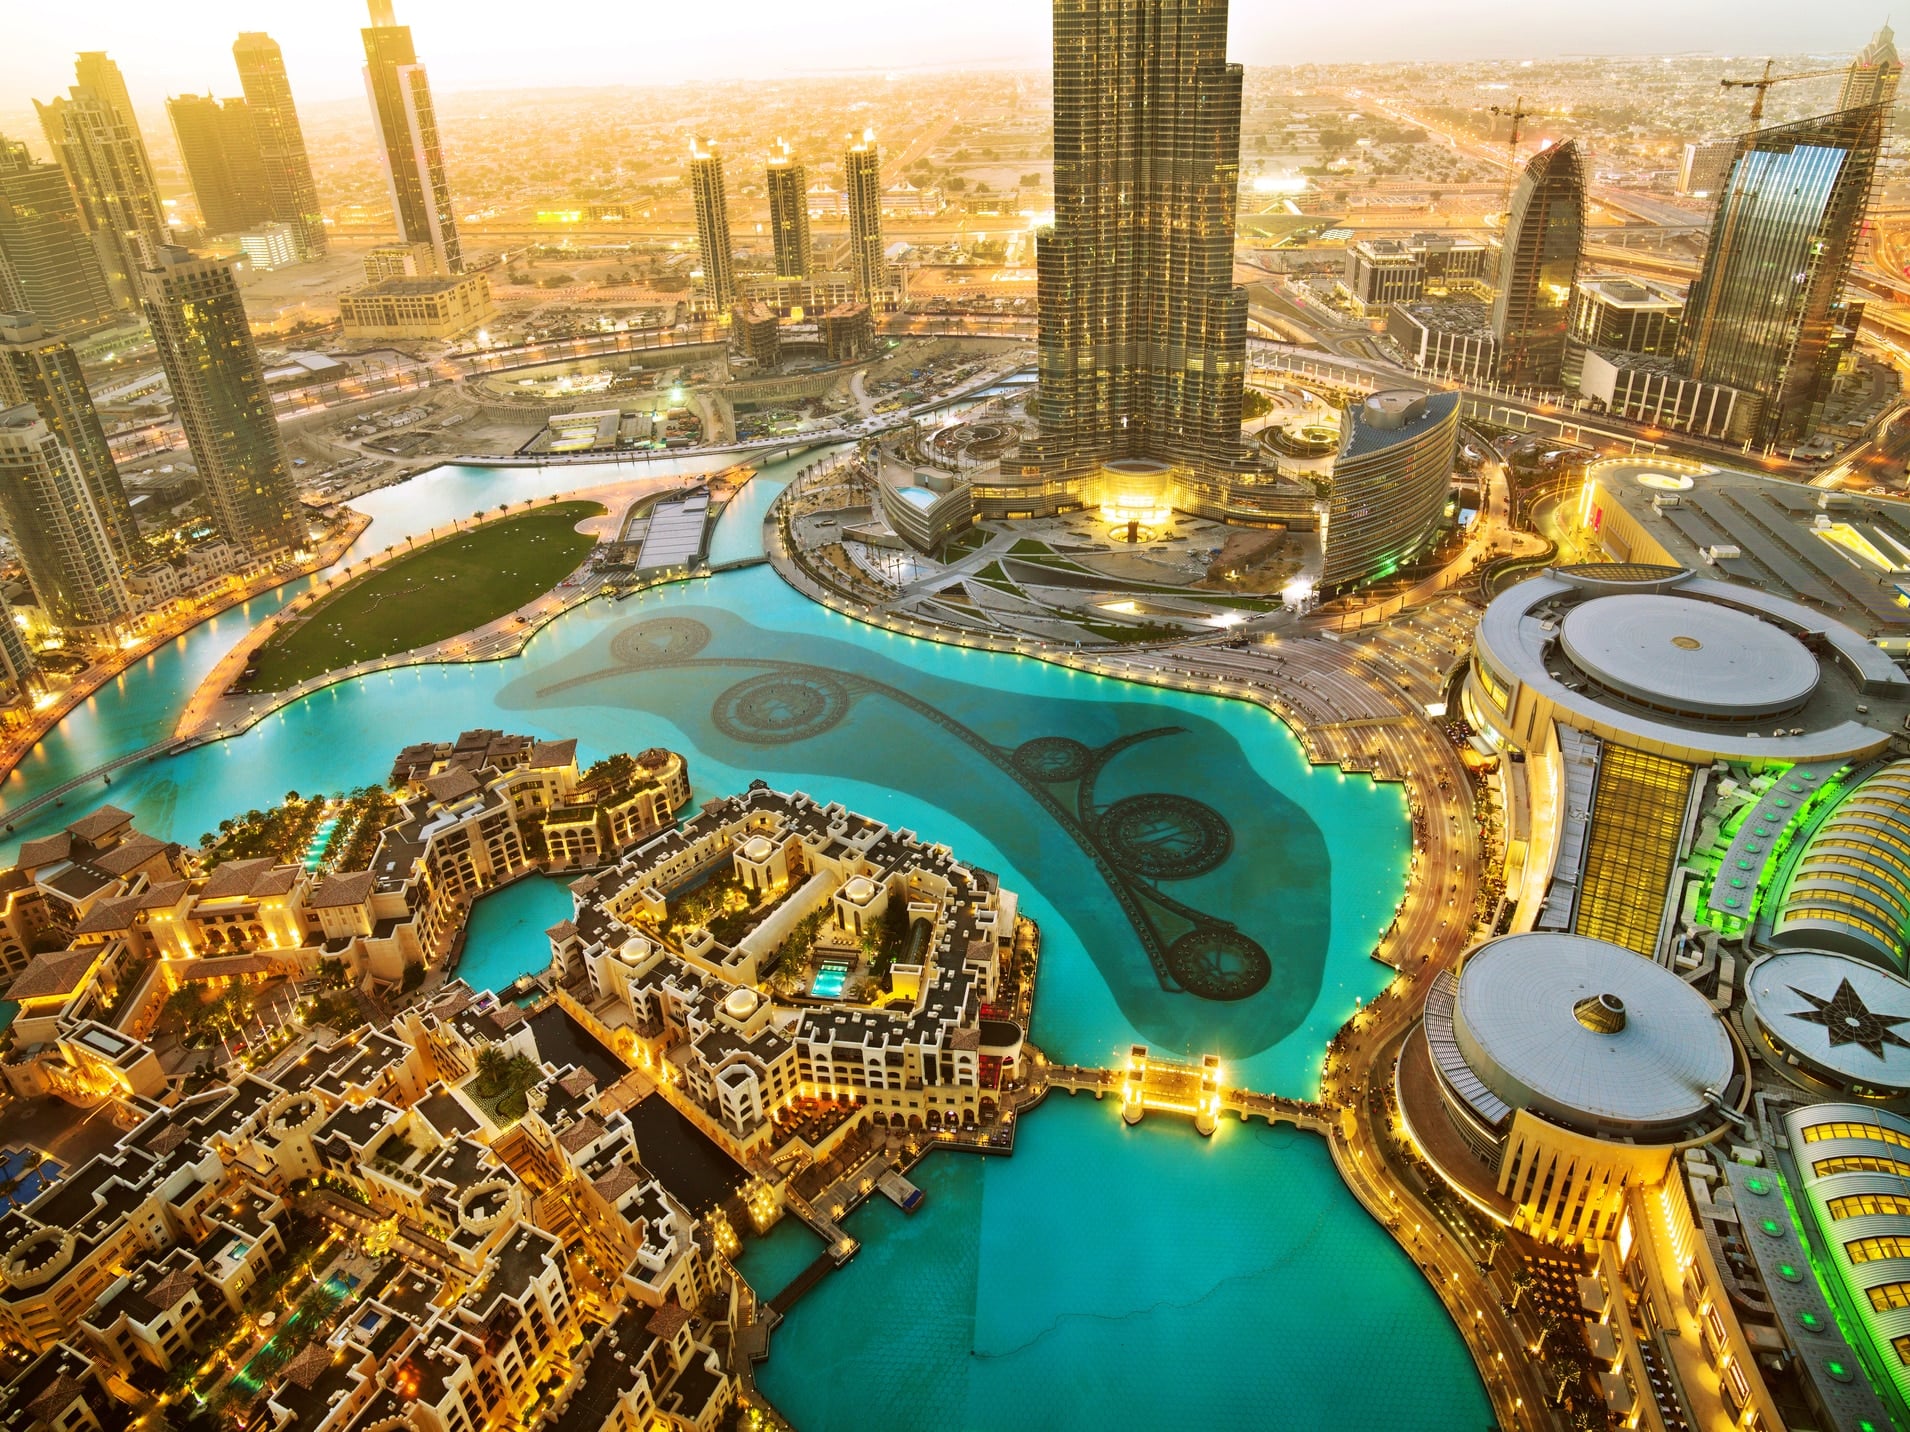 Shopping in Dubai: Malls, Markets, and Bargains